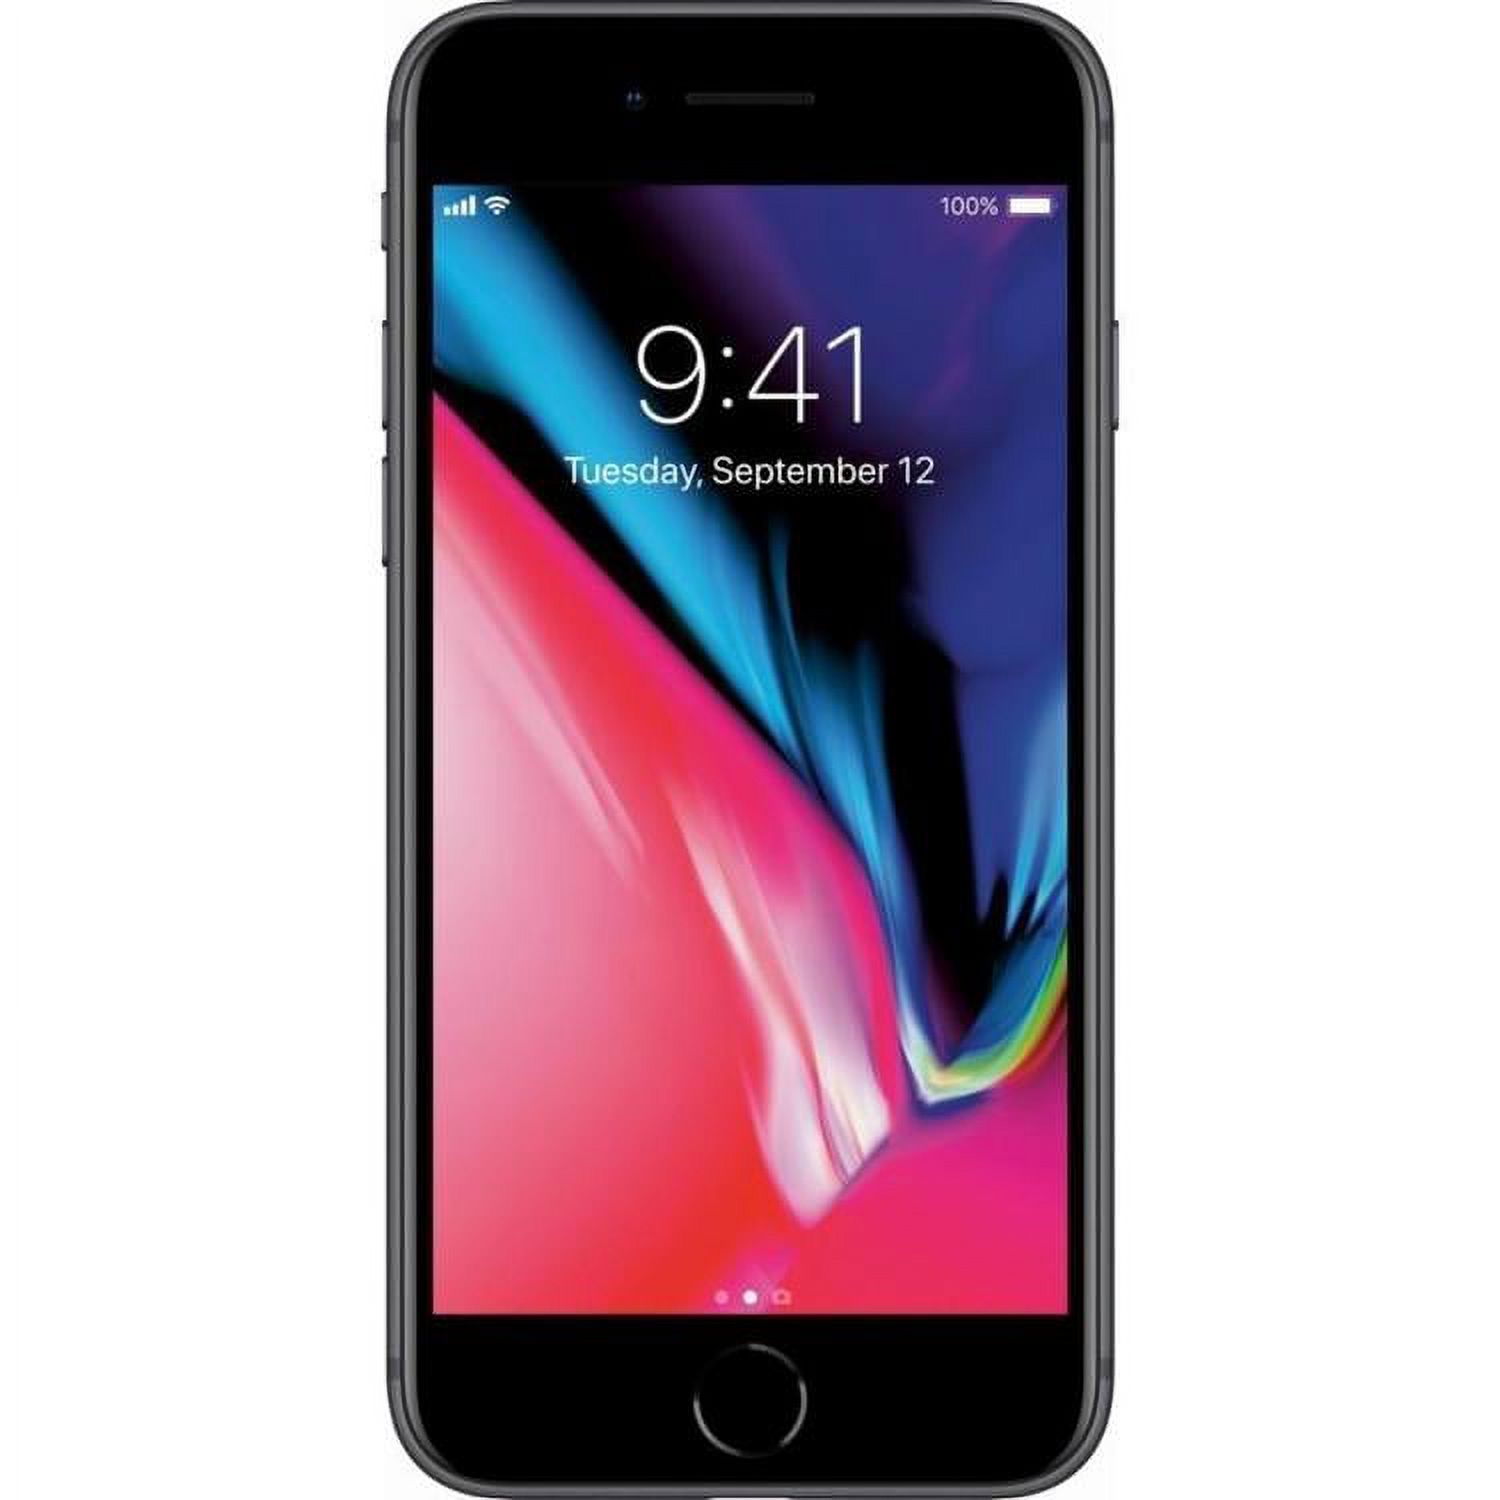 Pre-Owned Apple iPhone 8 - Sprint -  64GB - Space Gray (Refurbished: Good) - image 3 of 5